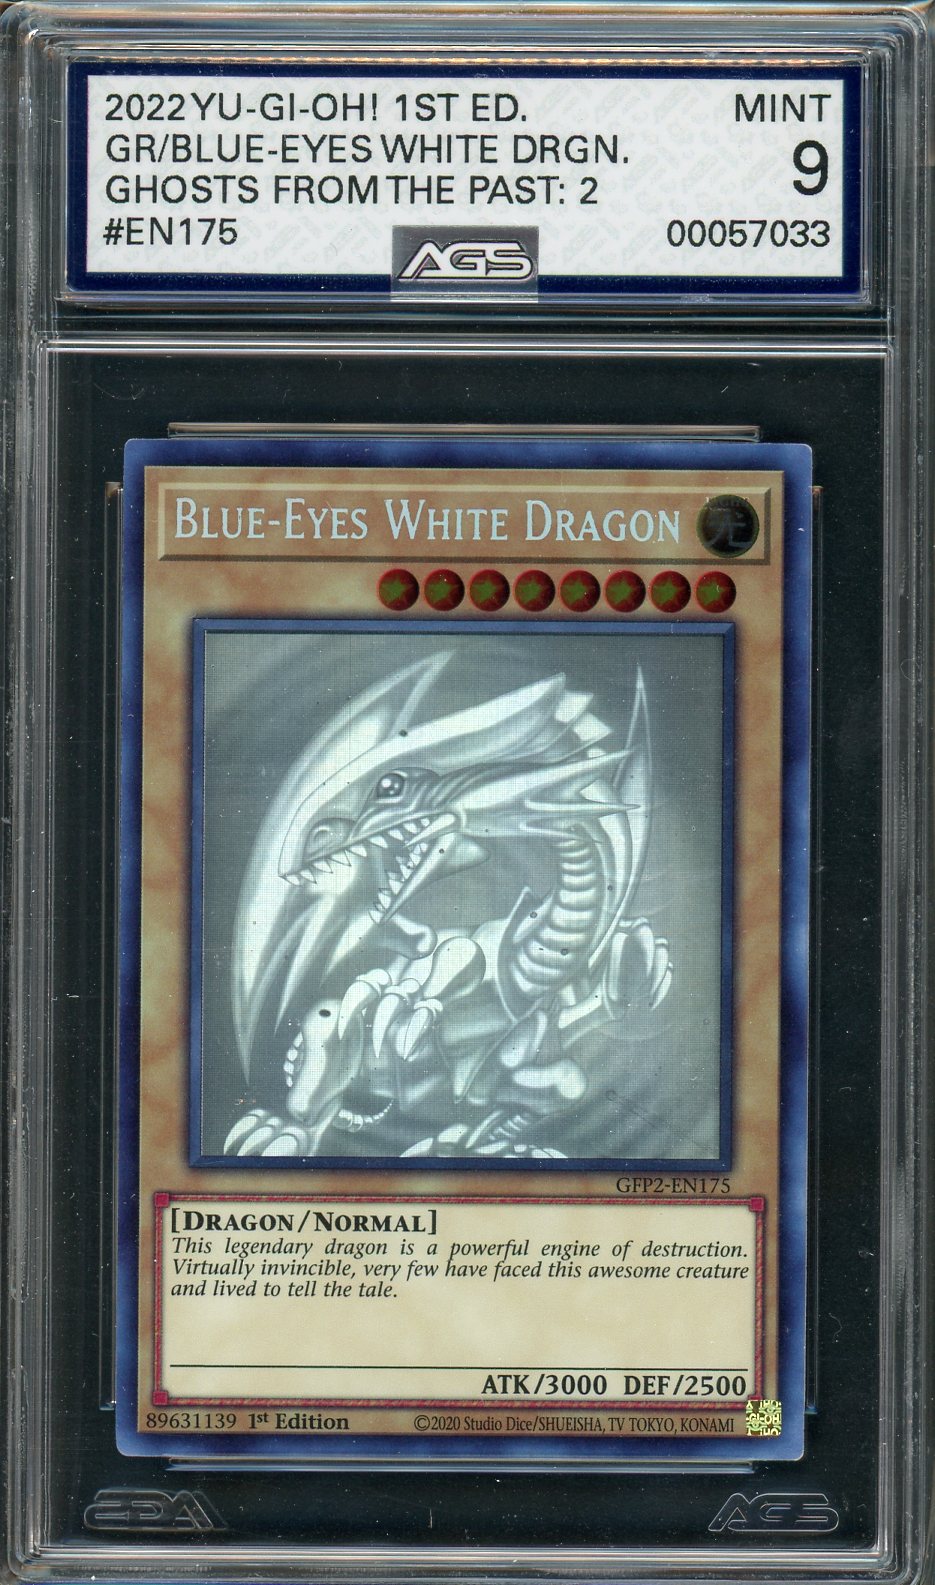 AGS (MINT 9) Blue-Eyes White Dragon #EN175 - Ghosts From The Past The 2nd Haunting (#00057033)